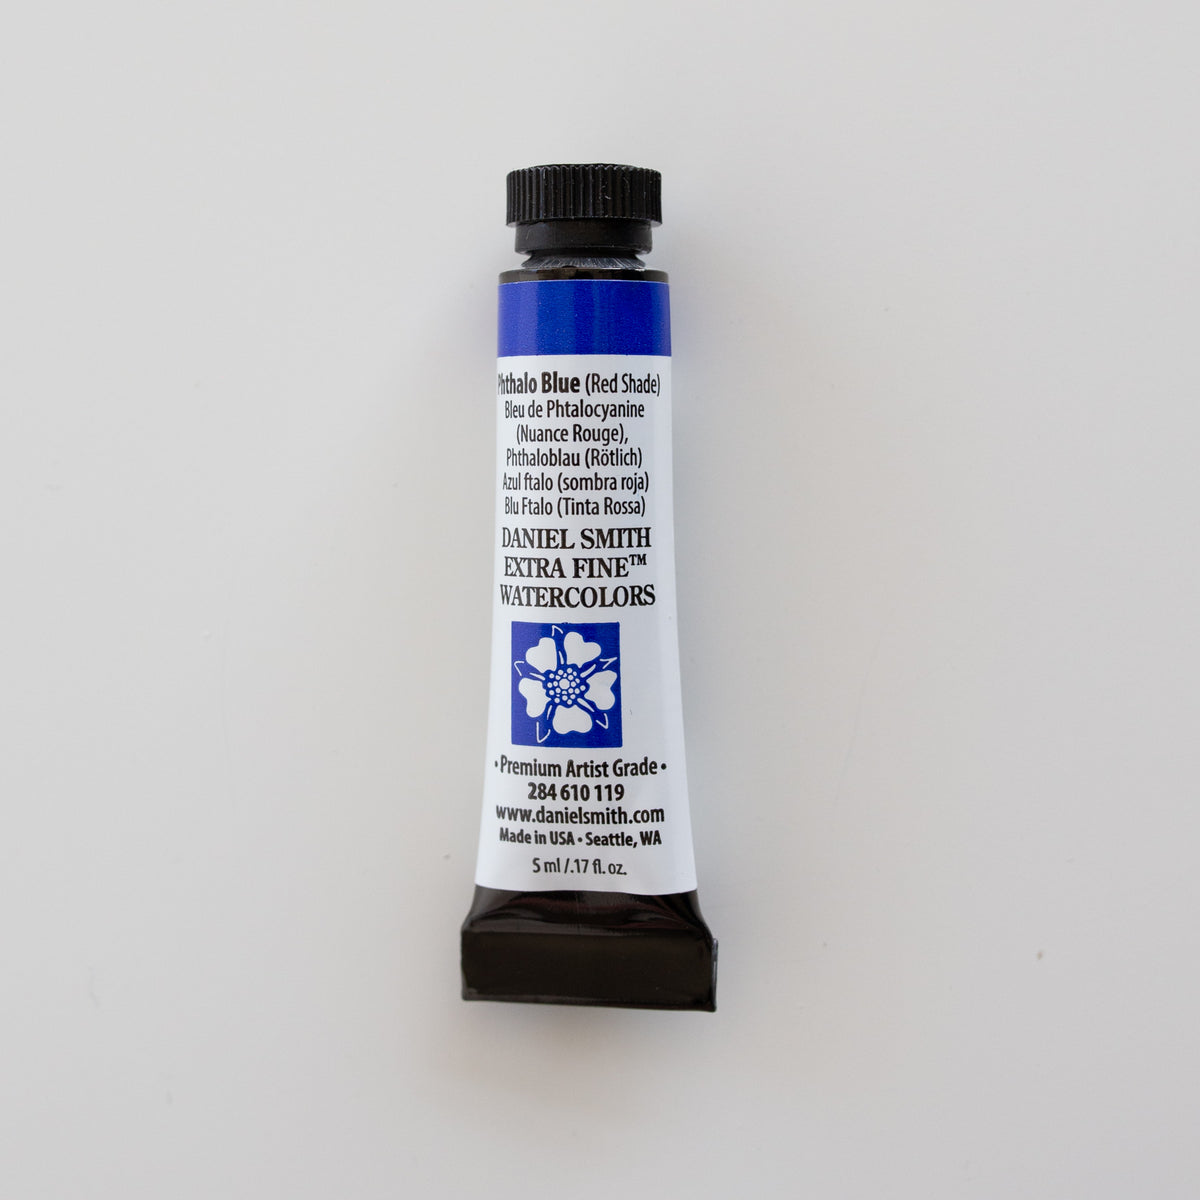 Daniel Smith Extra Fine Watercolors 5ml Phthalo Blue (Red Shade) 1